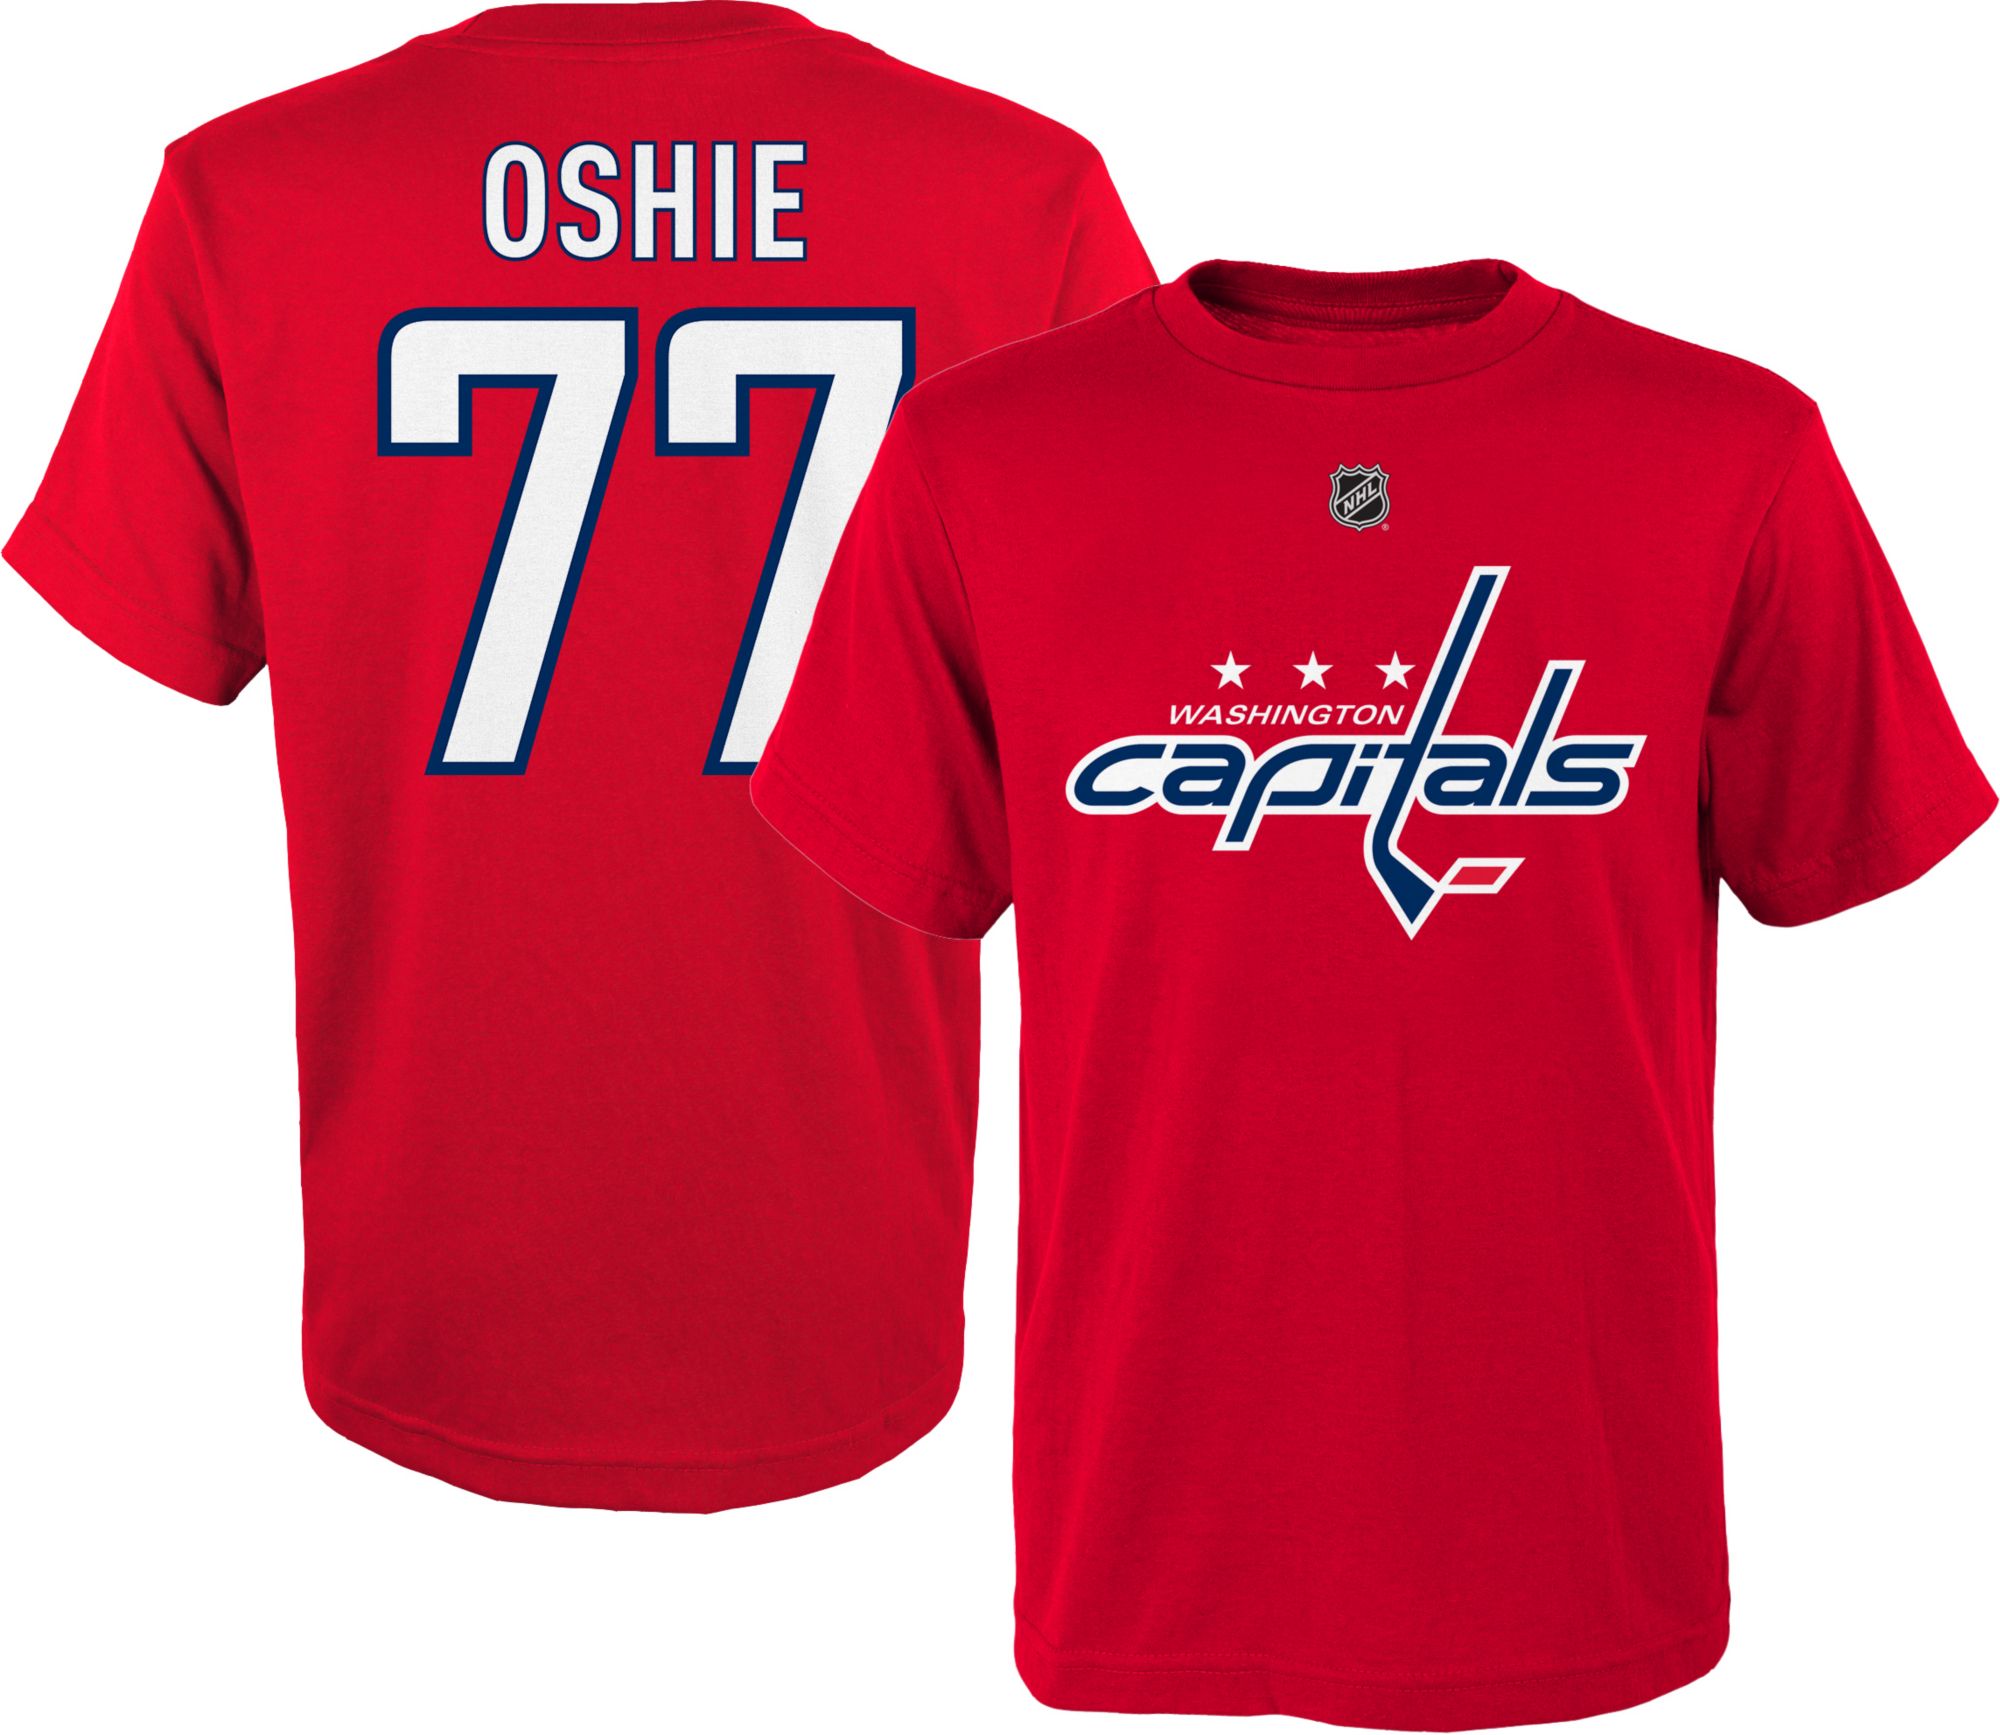 tj oshie jersey youth